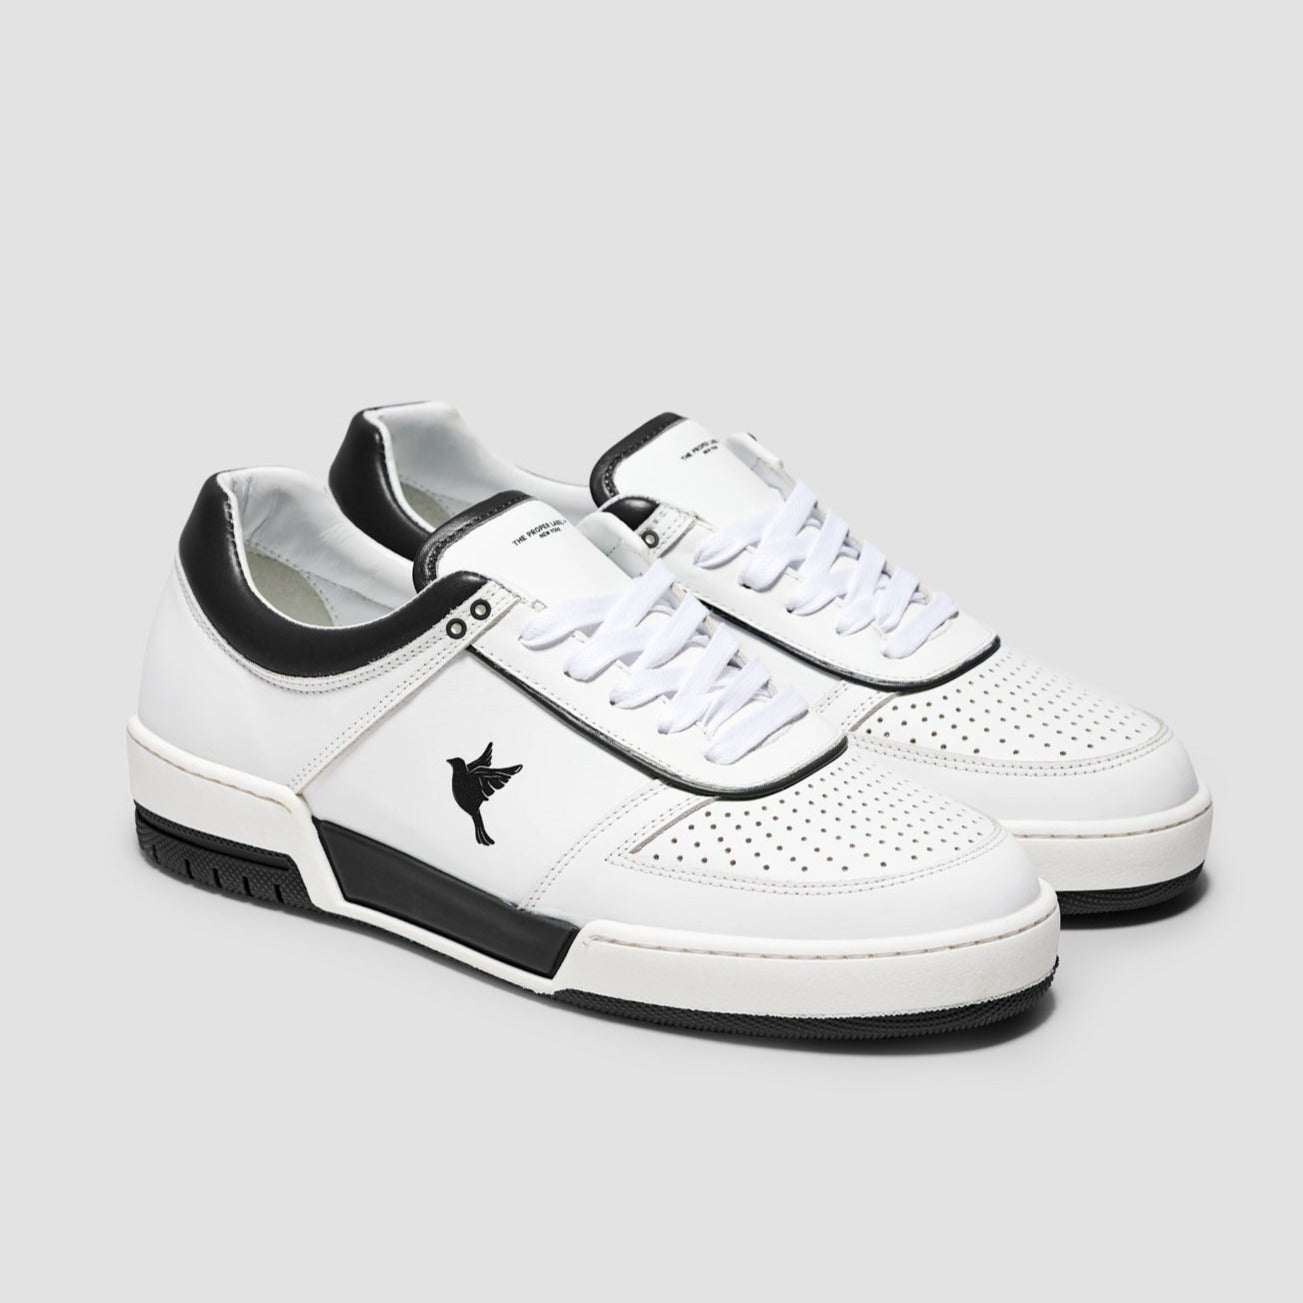 Sustainable sneakers made of durable with black and white color accents, showcasing a 3D-printed dove emblem on the side.